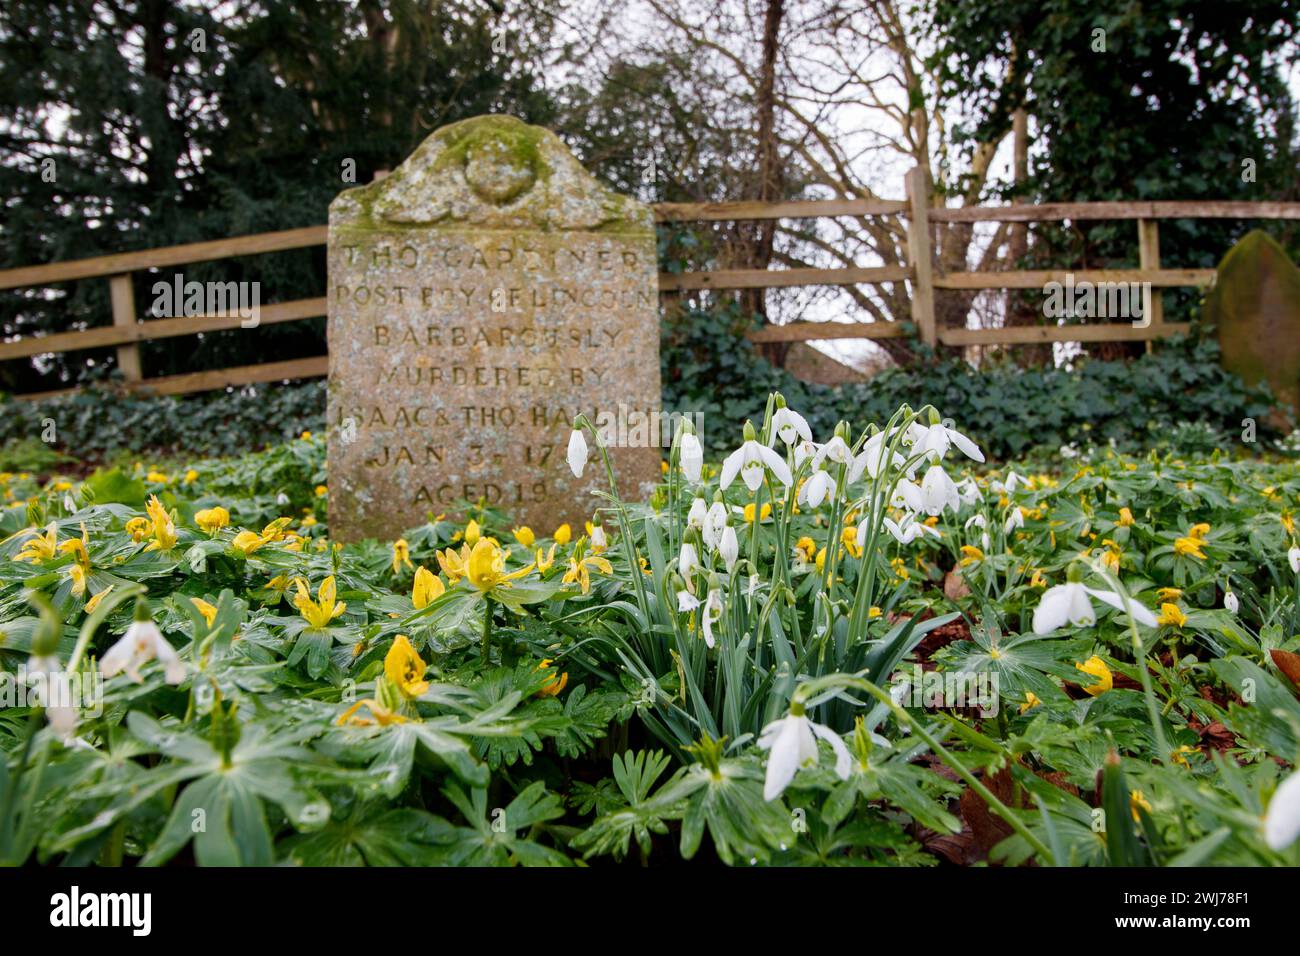 The tombstone of a nineteen years old post boy, Thomas Gardiner mudered in 1732 is awash with the bright colours of early spring blooming flowers in the village of Nettleham, Lincolnshire. Stock Photo